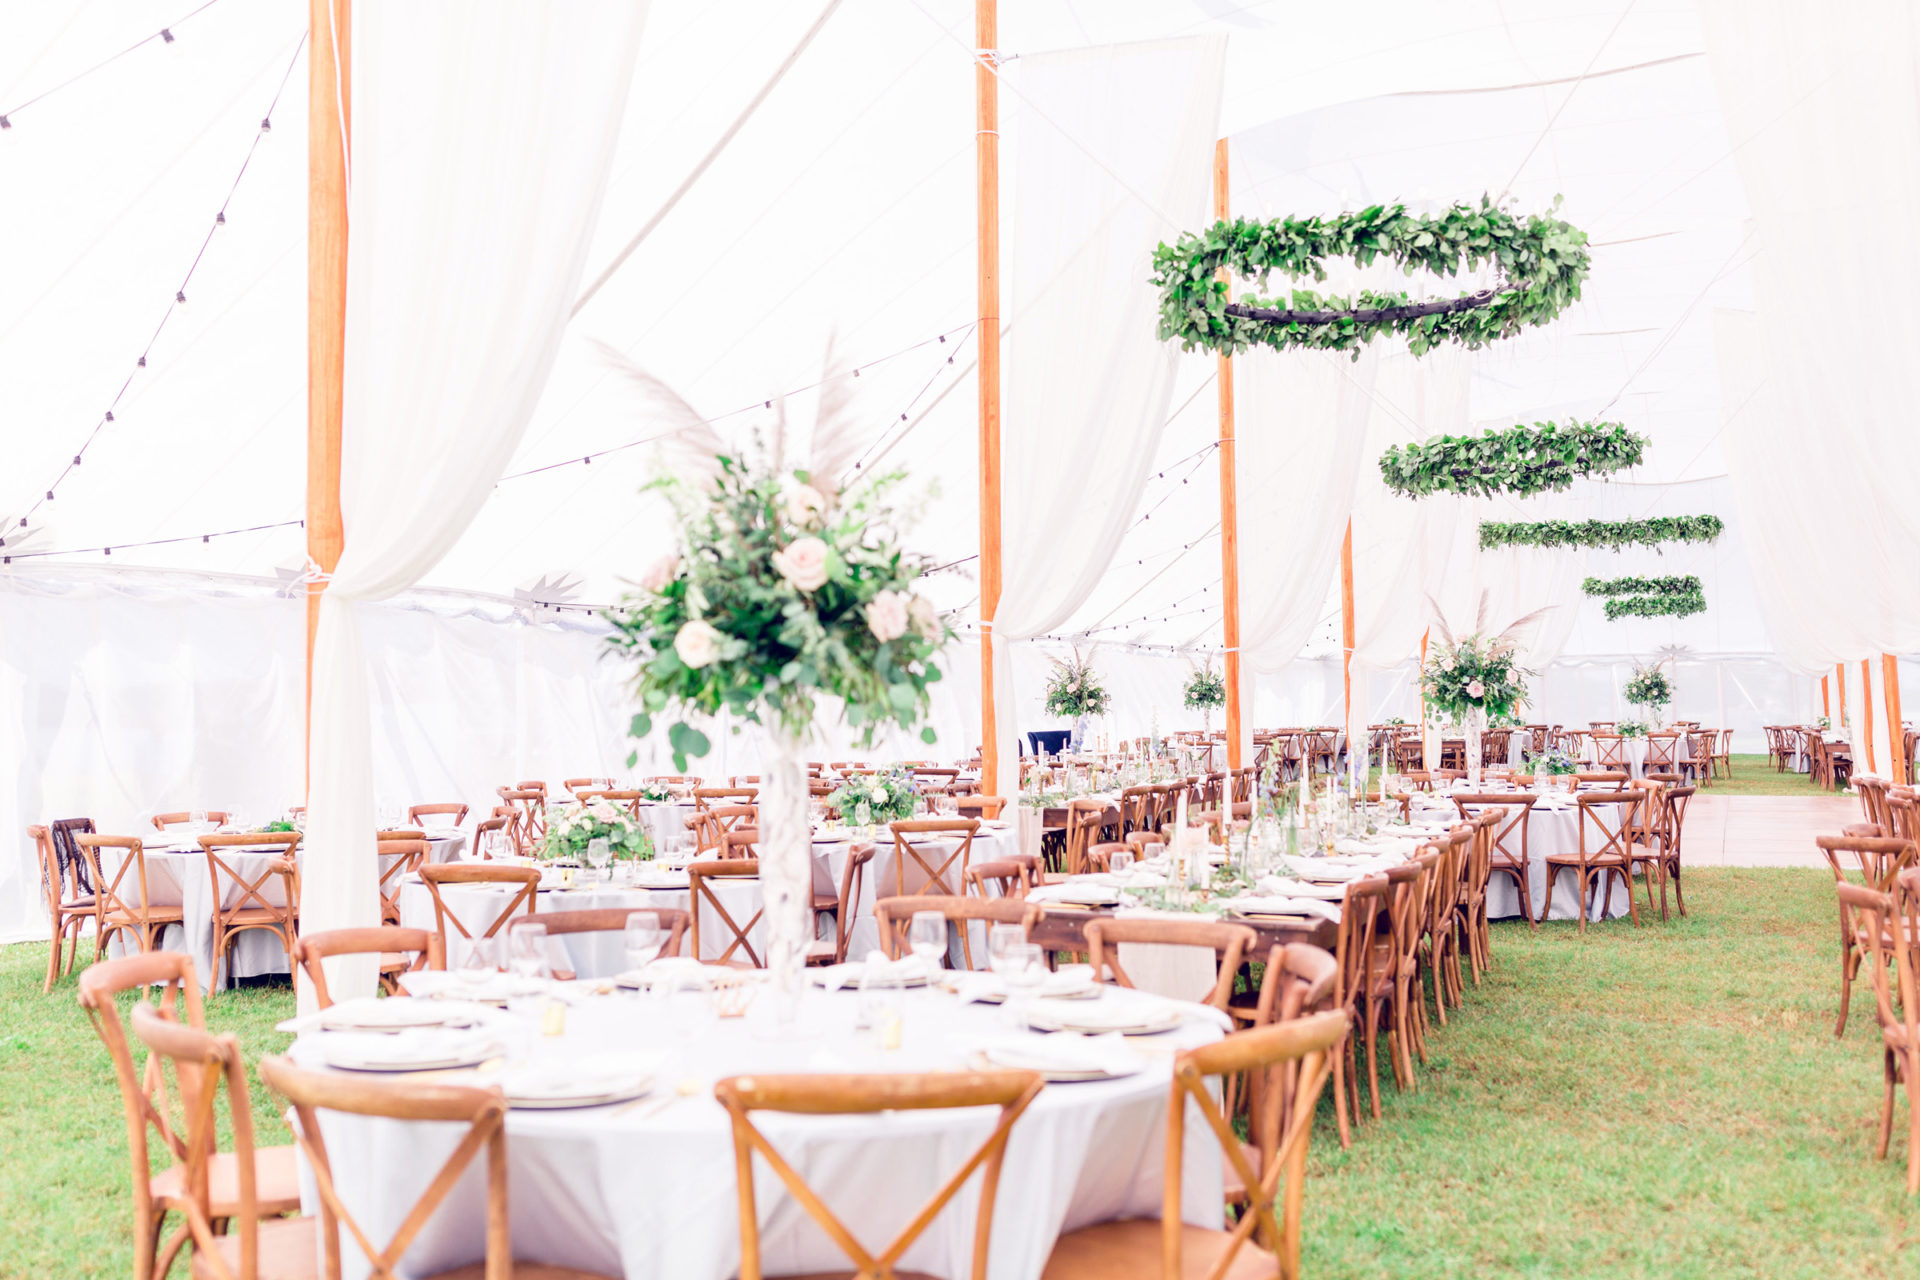 large white tent for wedding receptions